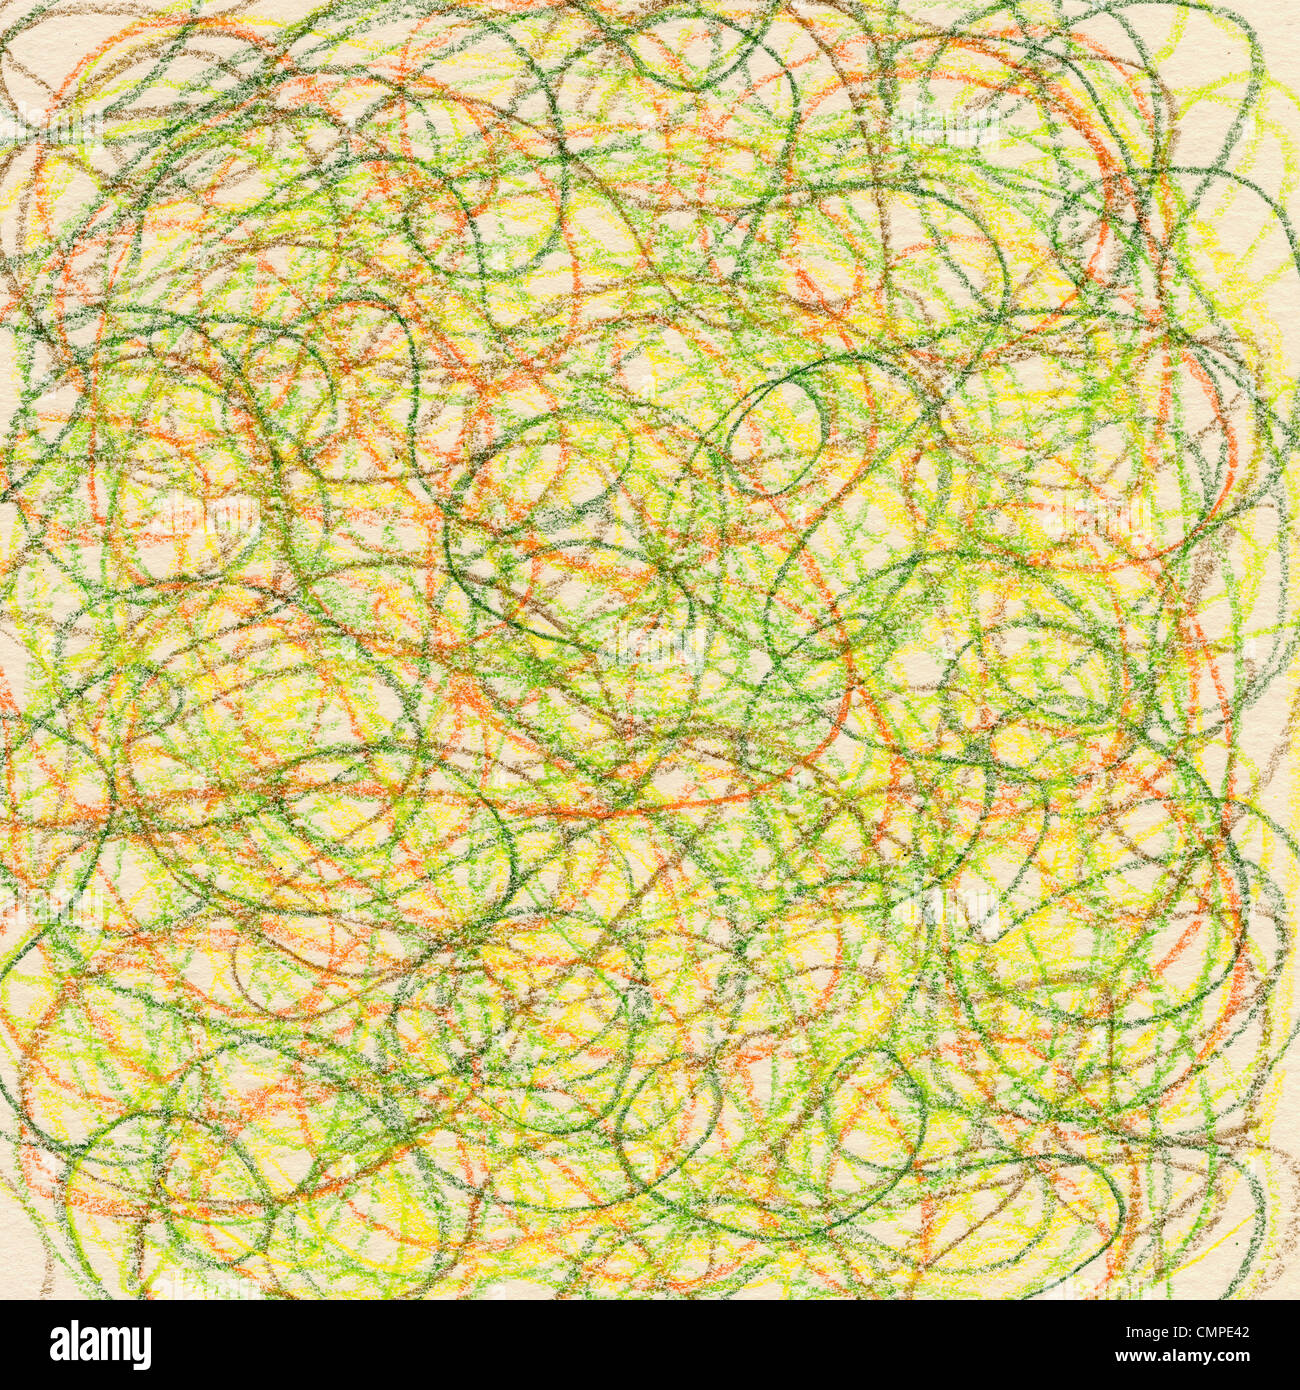 hand-drawn crayon circular scribble in green, red and yellow colors on ivory paper background Stock Photo